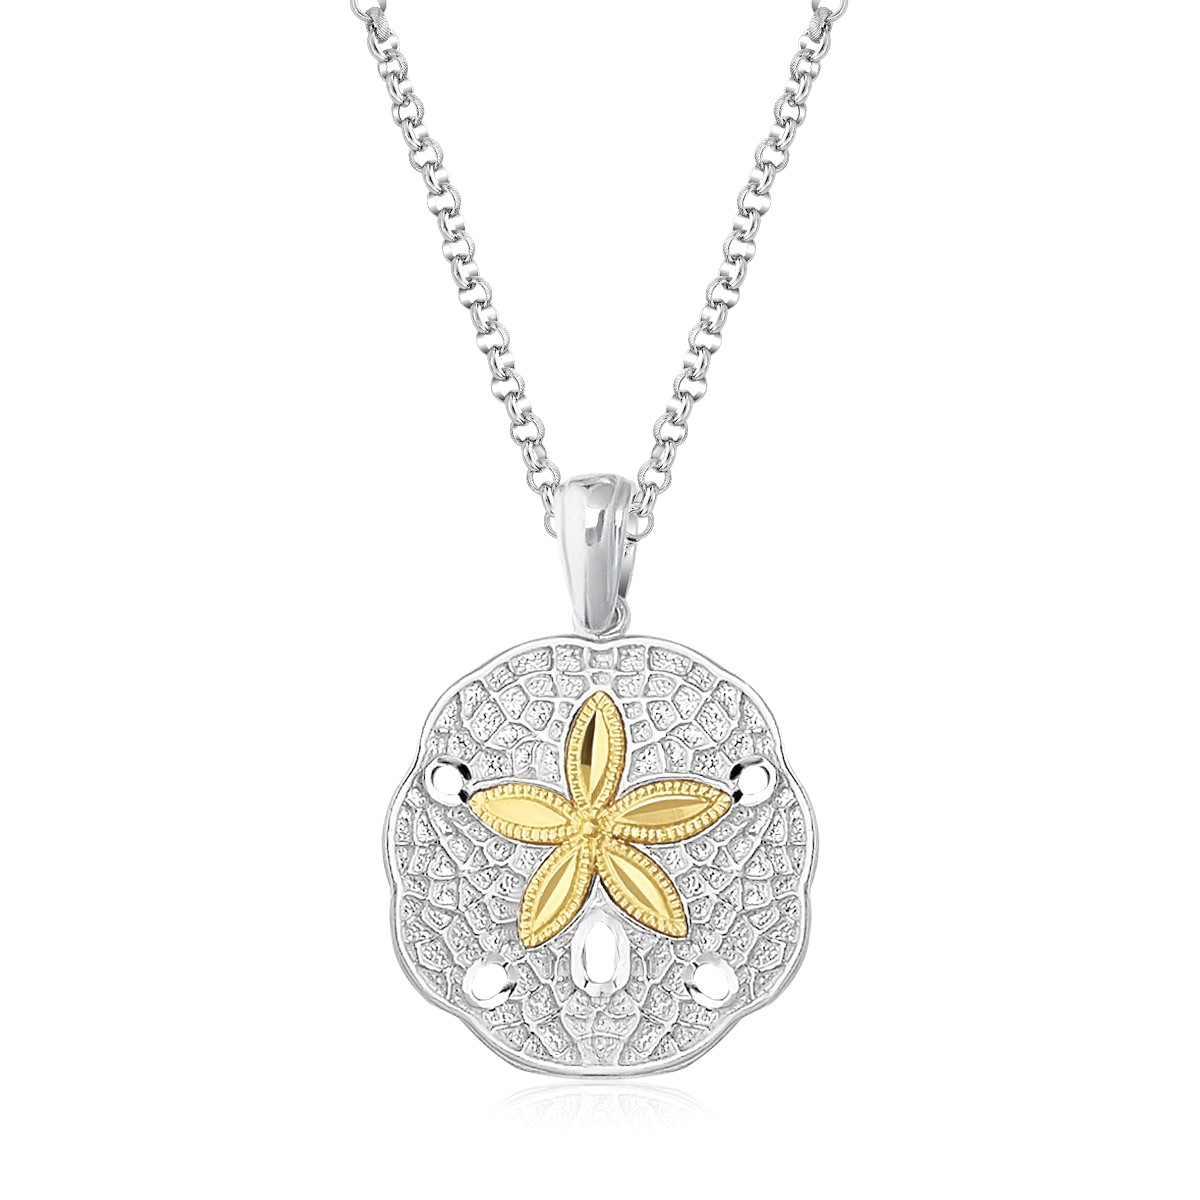 Sand Dollar Pendant in Sterling Silver and 14K Yellow Gold - Richard